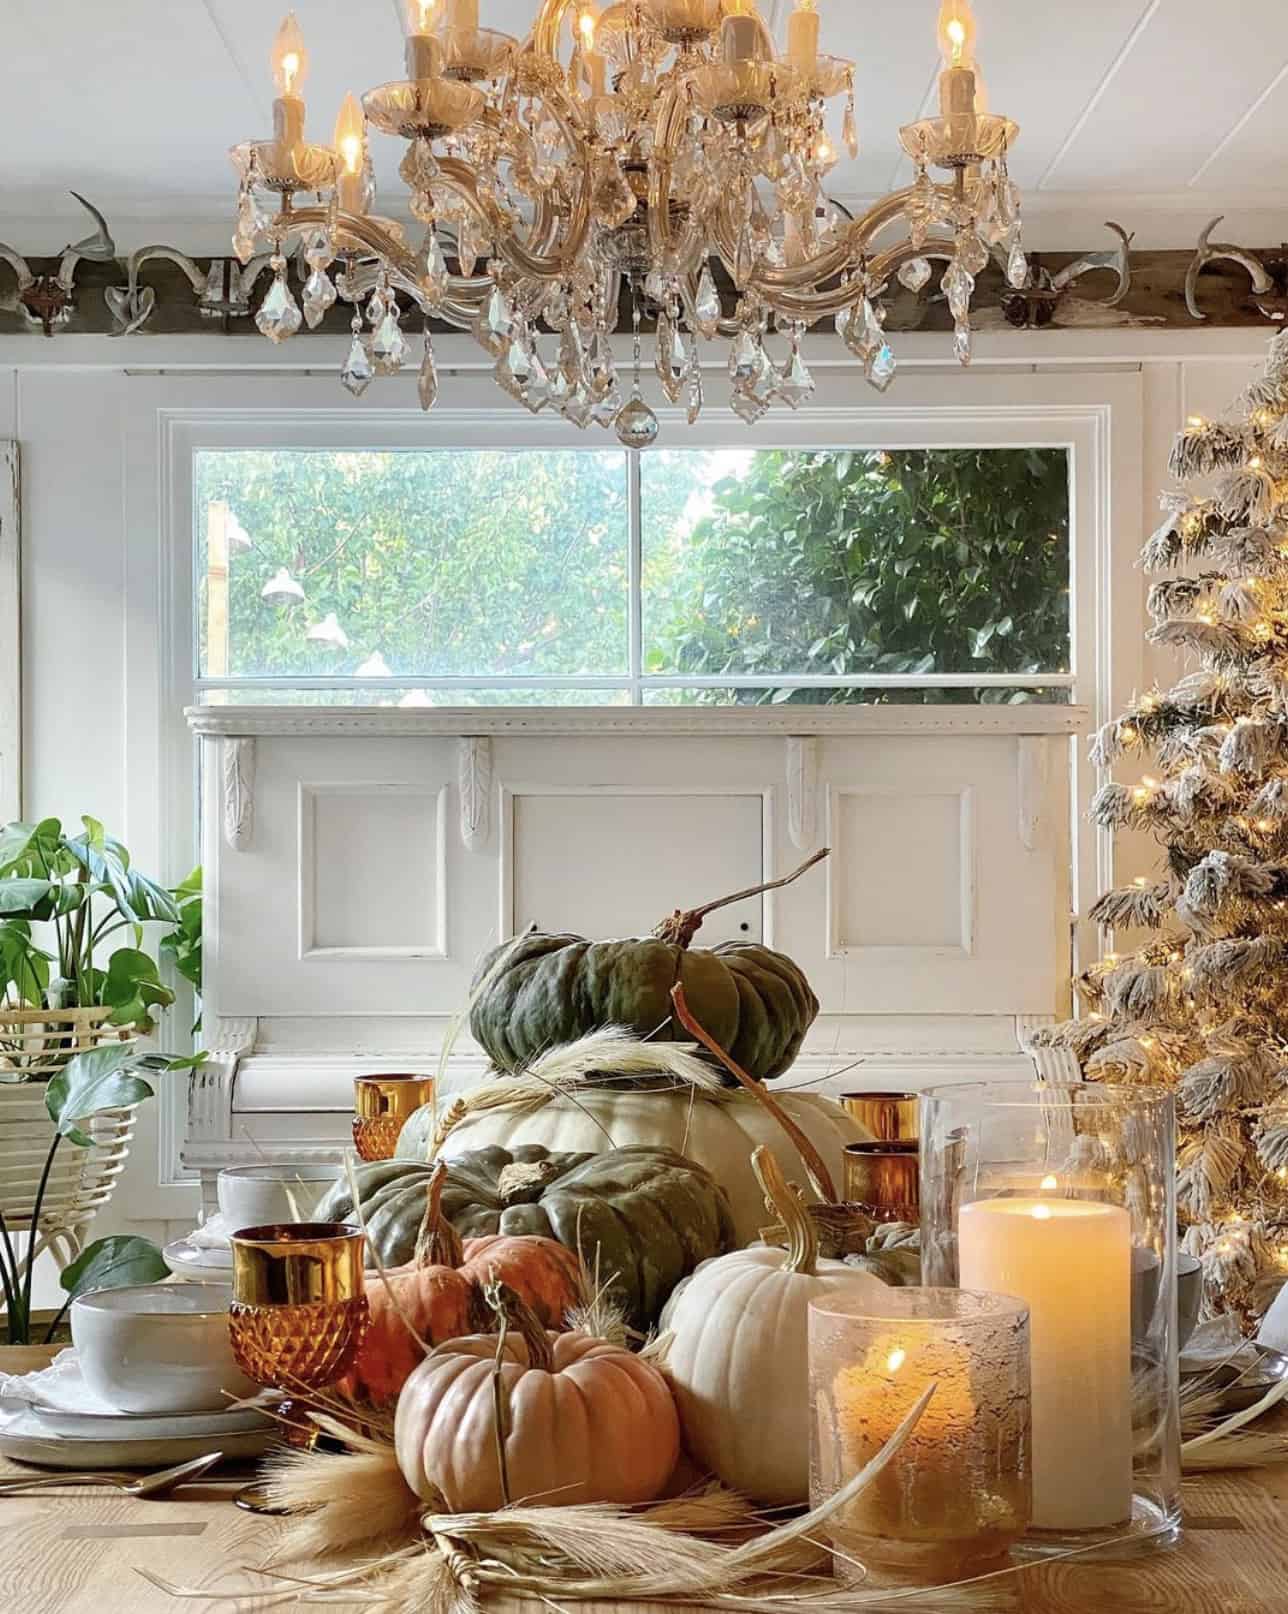 dining-table-styled-with-pumpkins-and-a-christmas-tree-in-the-background